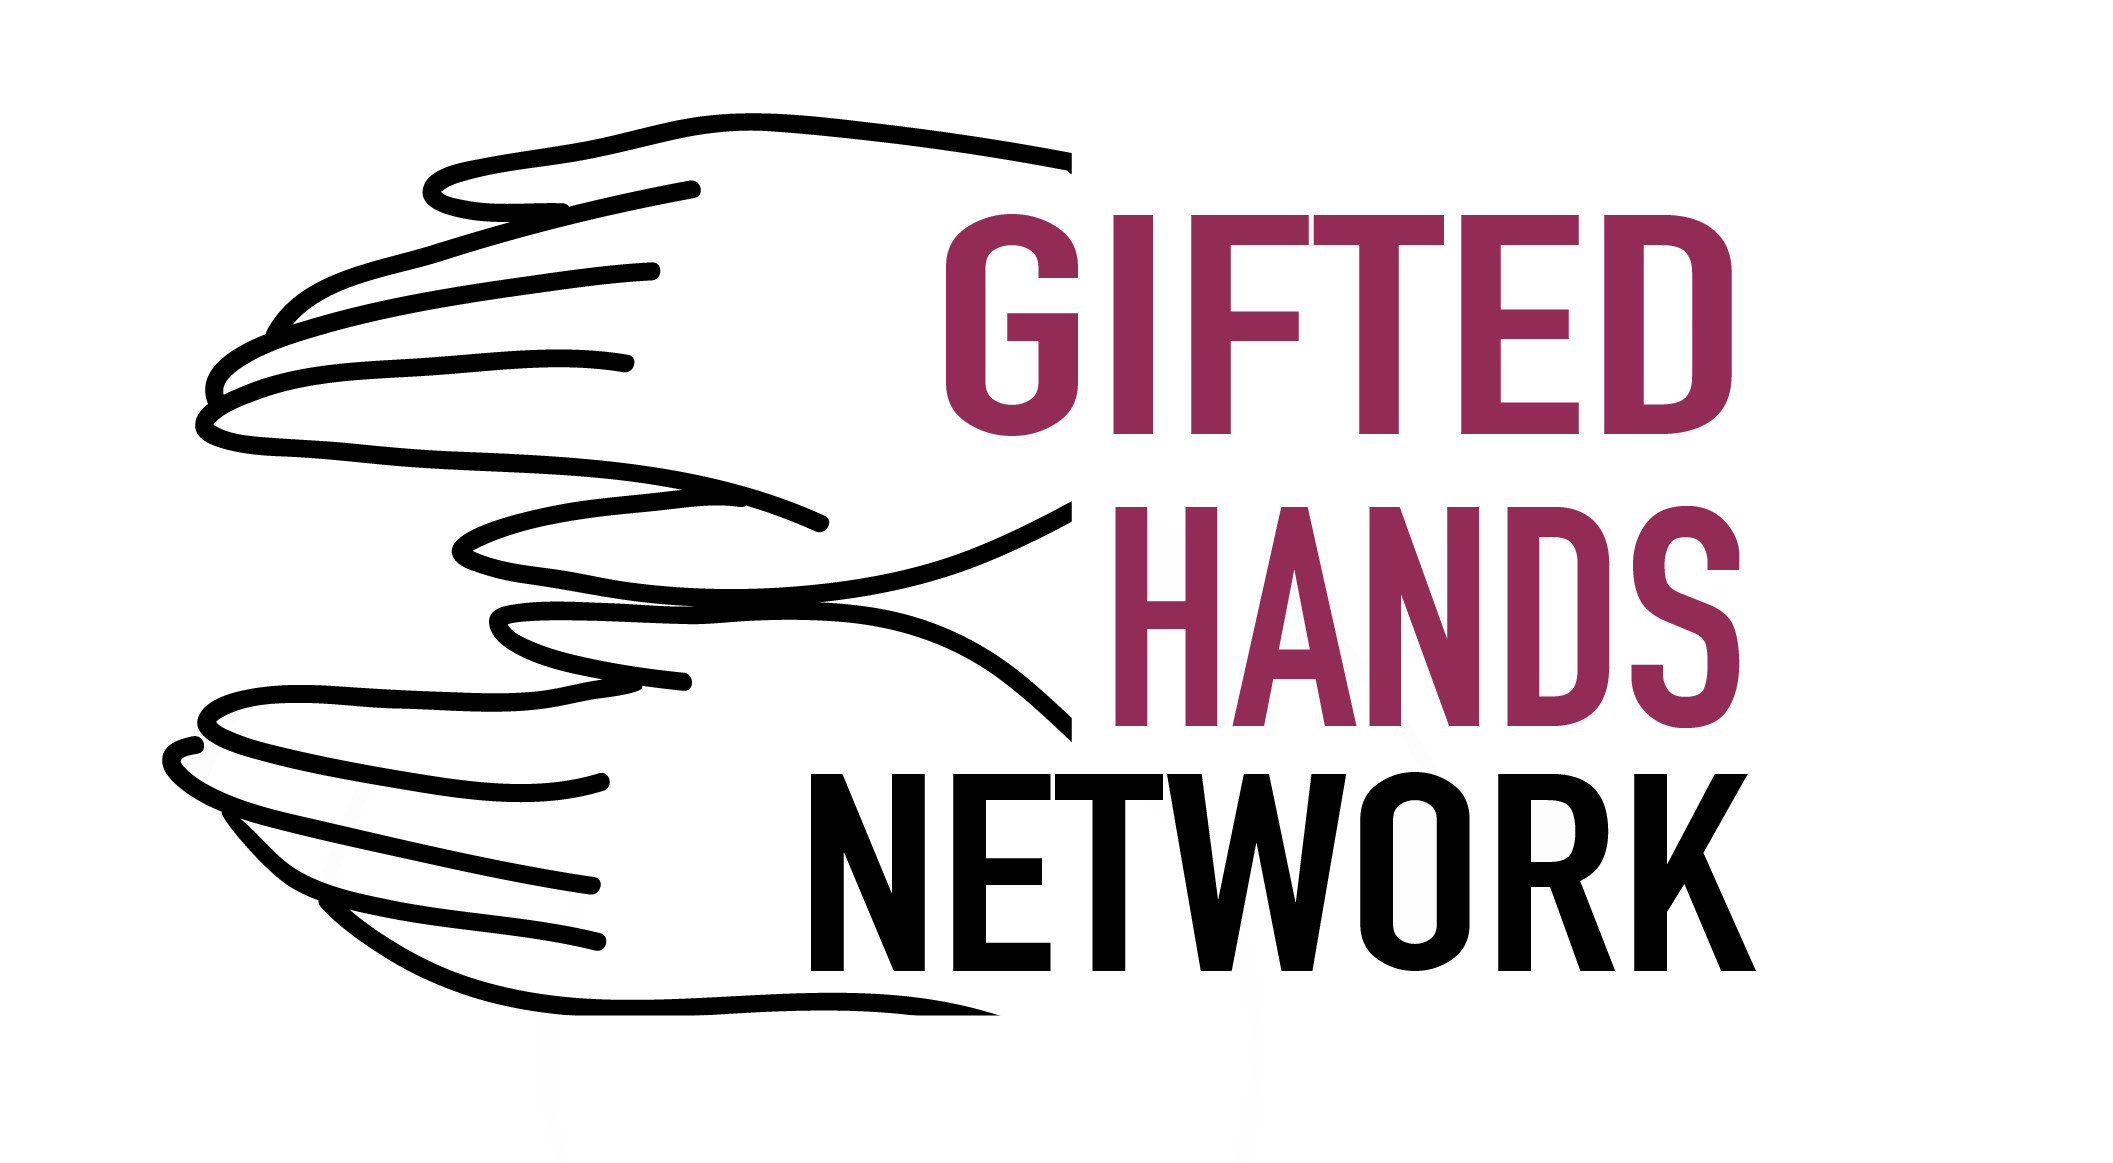 Gifted Hands Network